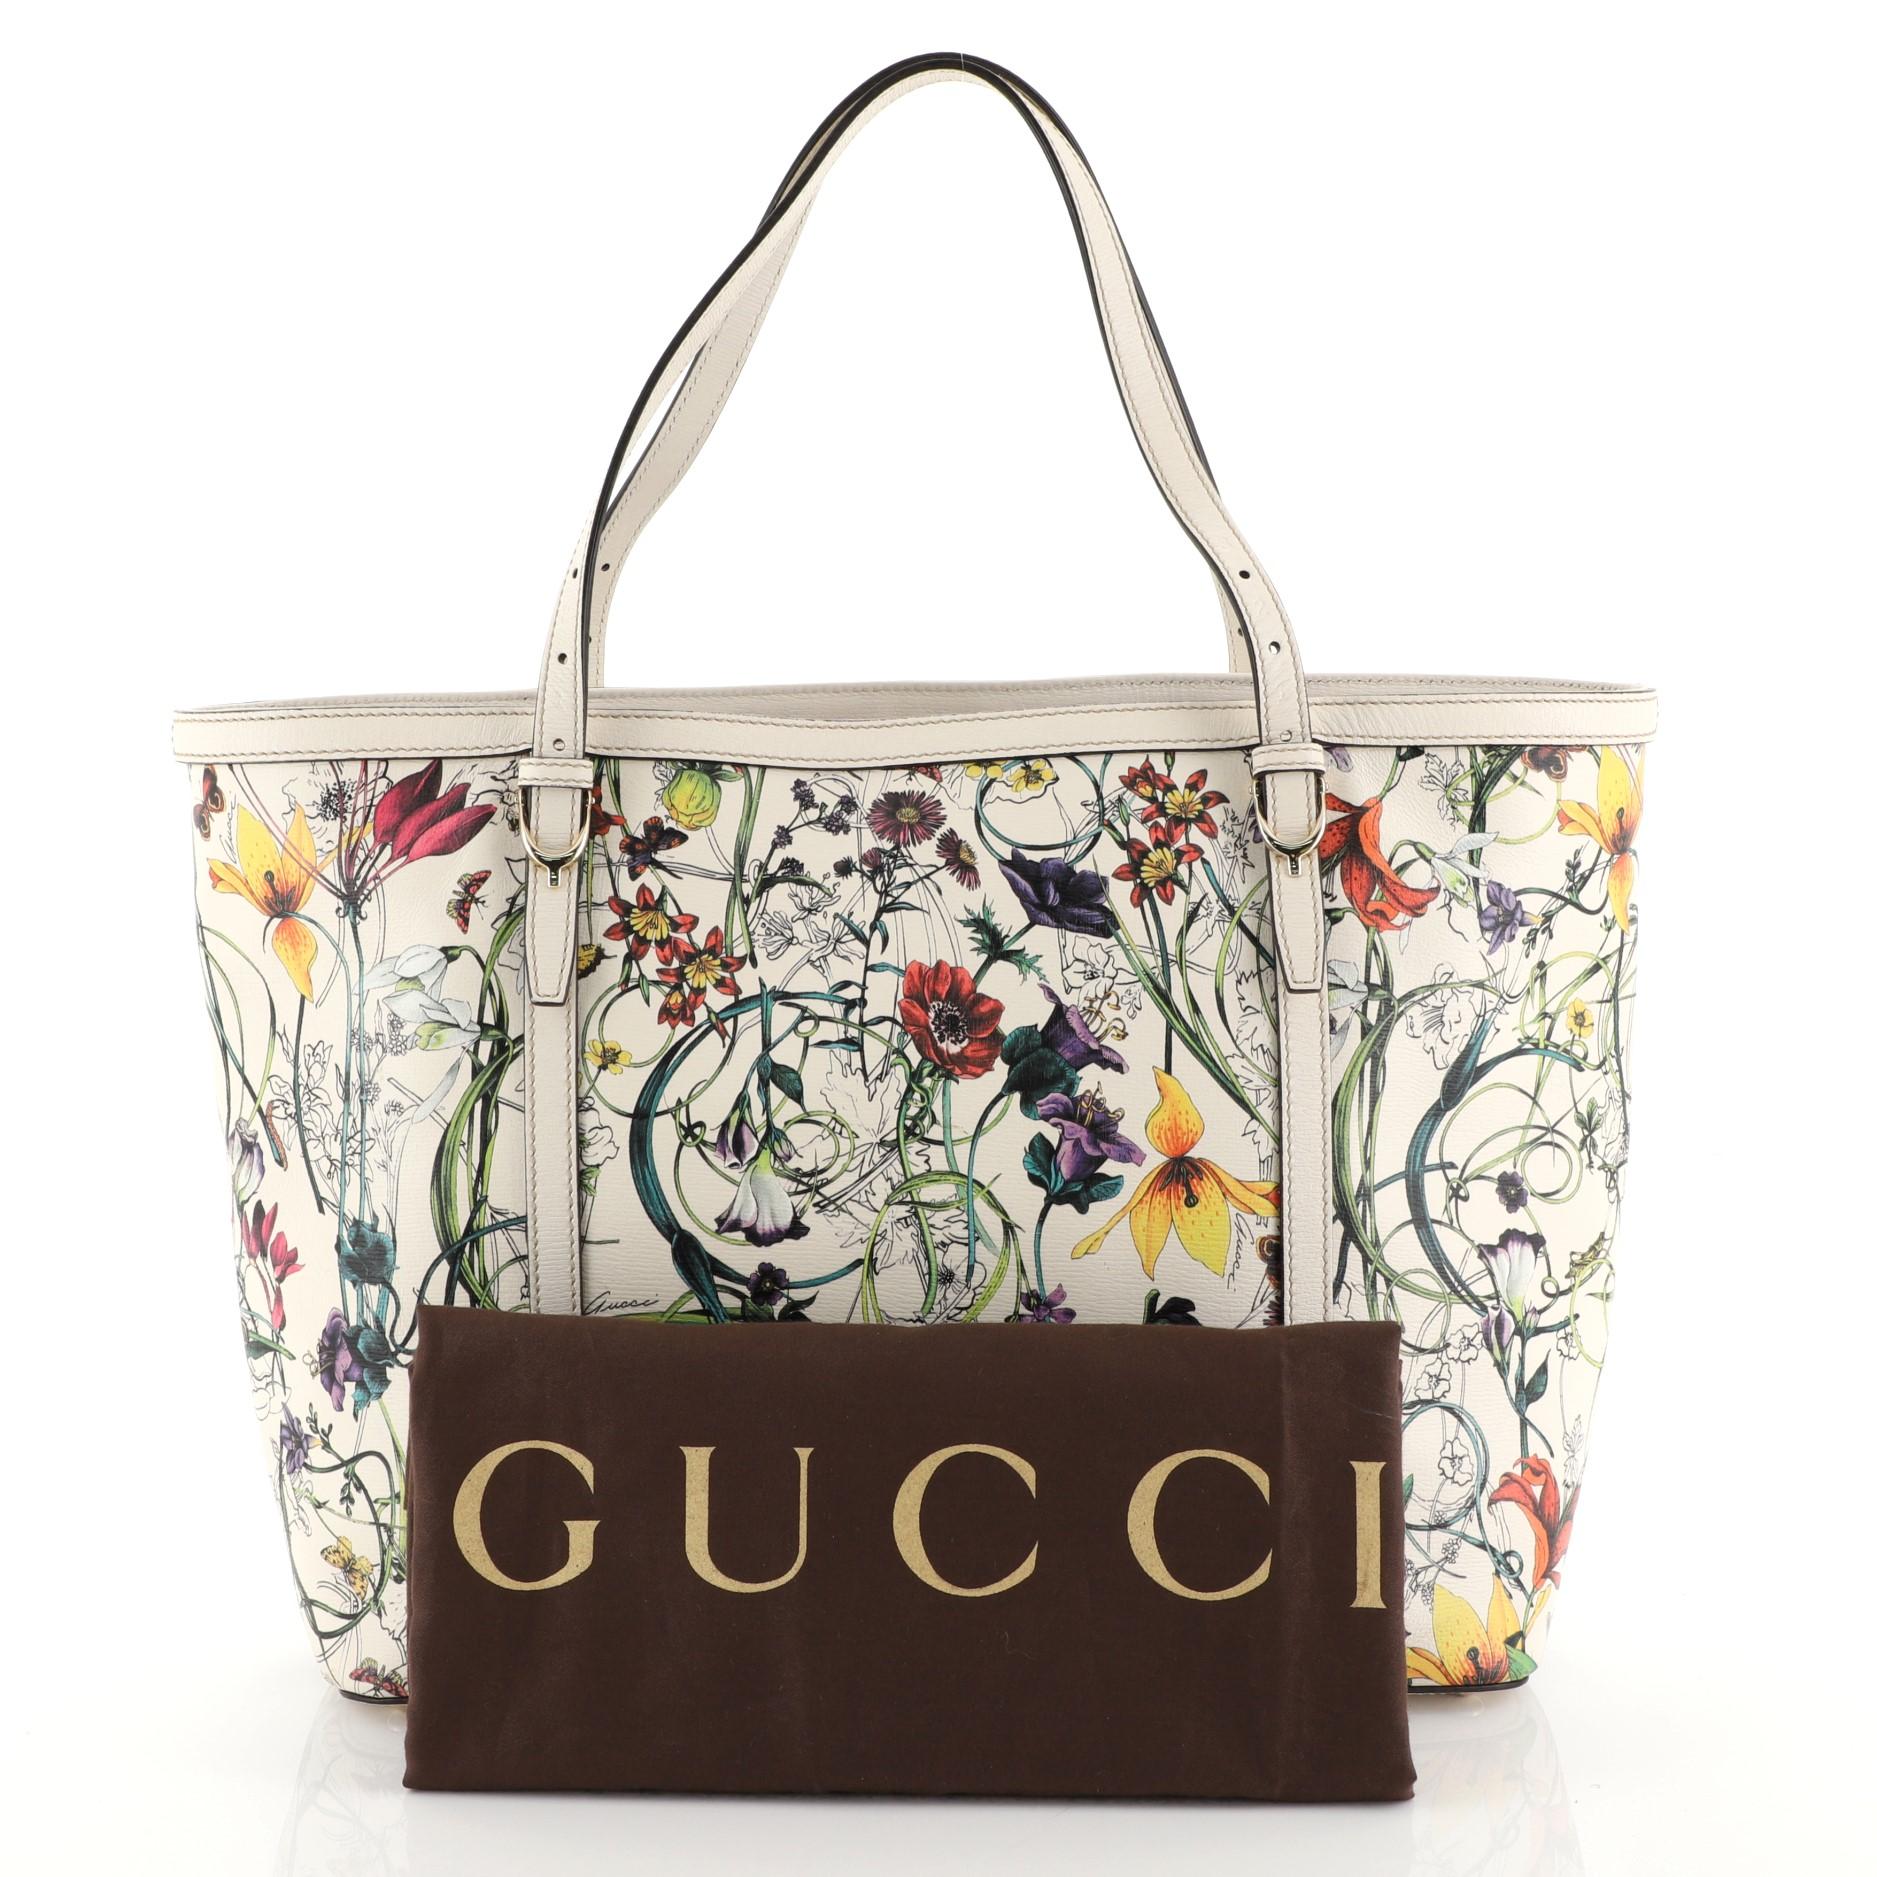 This Gucci Nice Tote Floral Printed Leather Medium, crafted in white floral printed leather with white leather trims, features adjustable dual-flat handles with gold spur details and gold-tone hardware. Its hook closure opens to a purple fabric